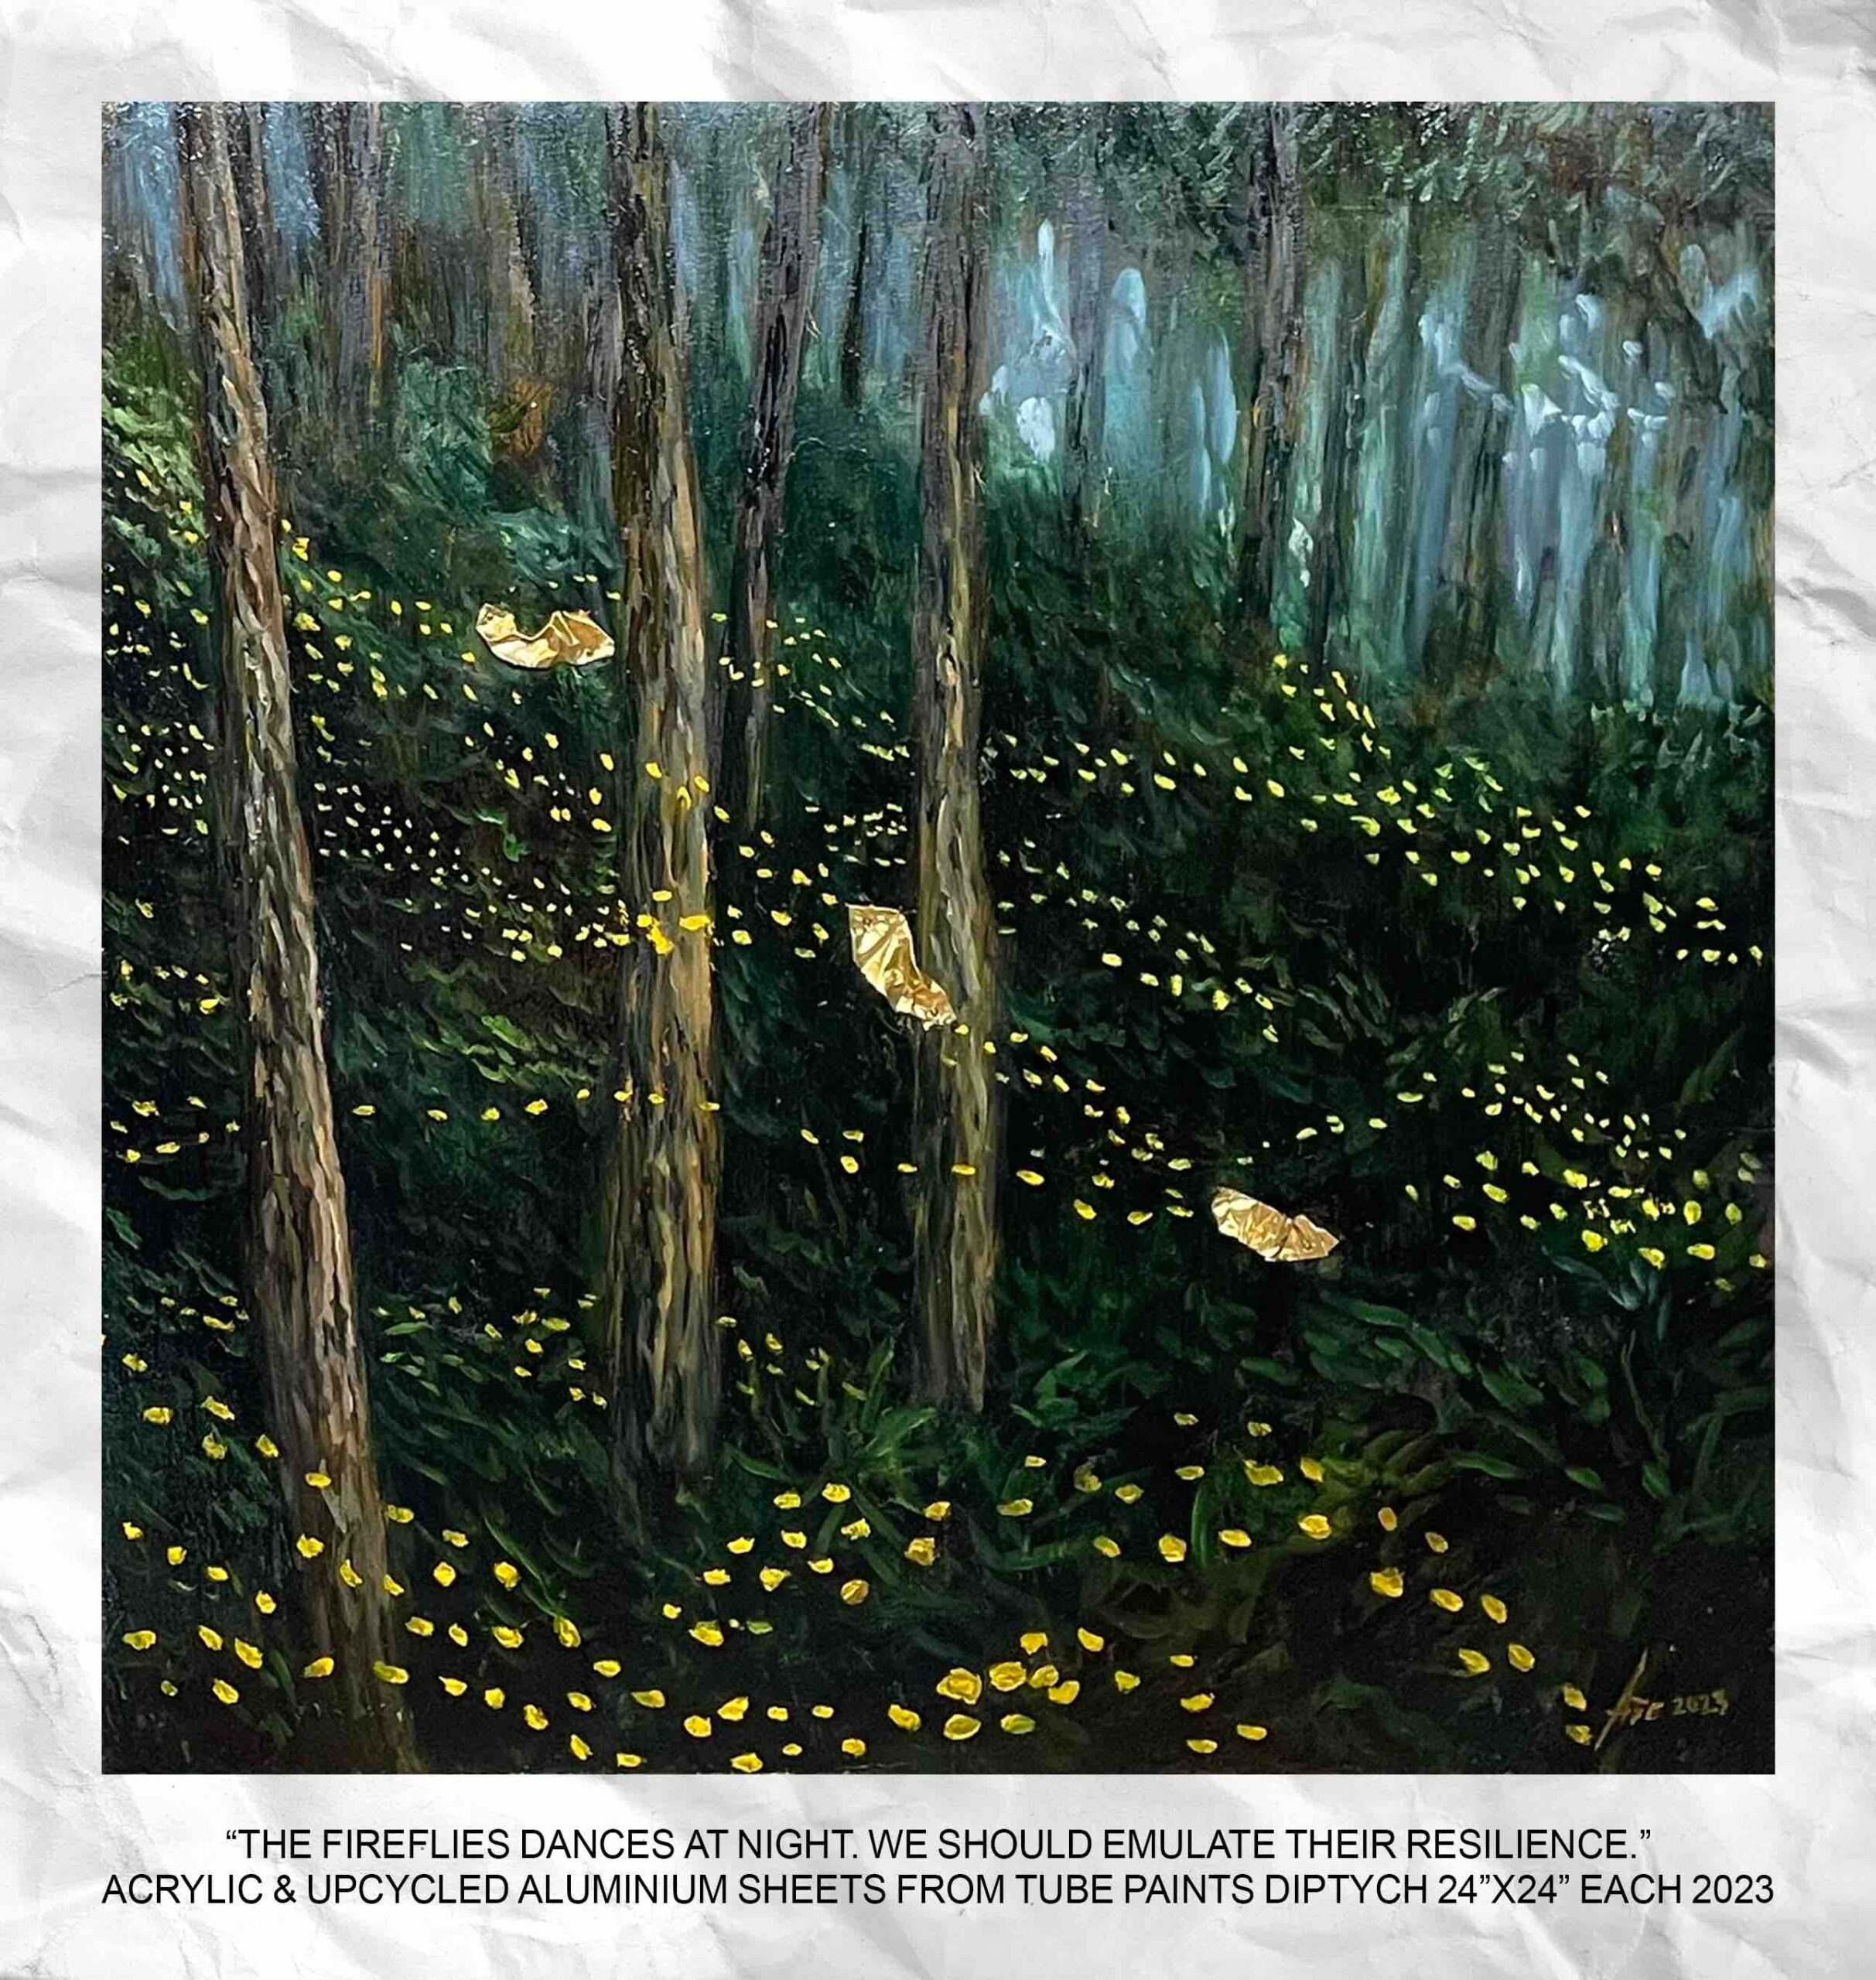 Abe Orobia's Diptych "The Fireflies Dance At Night. We Should Emulate Their Resilience."